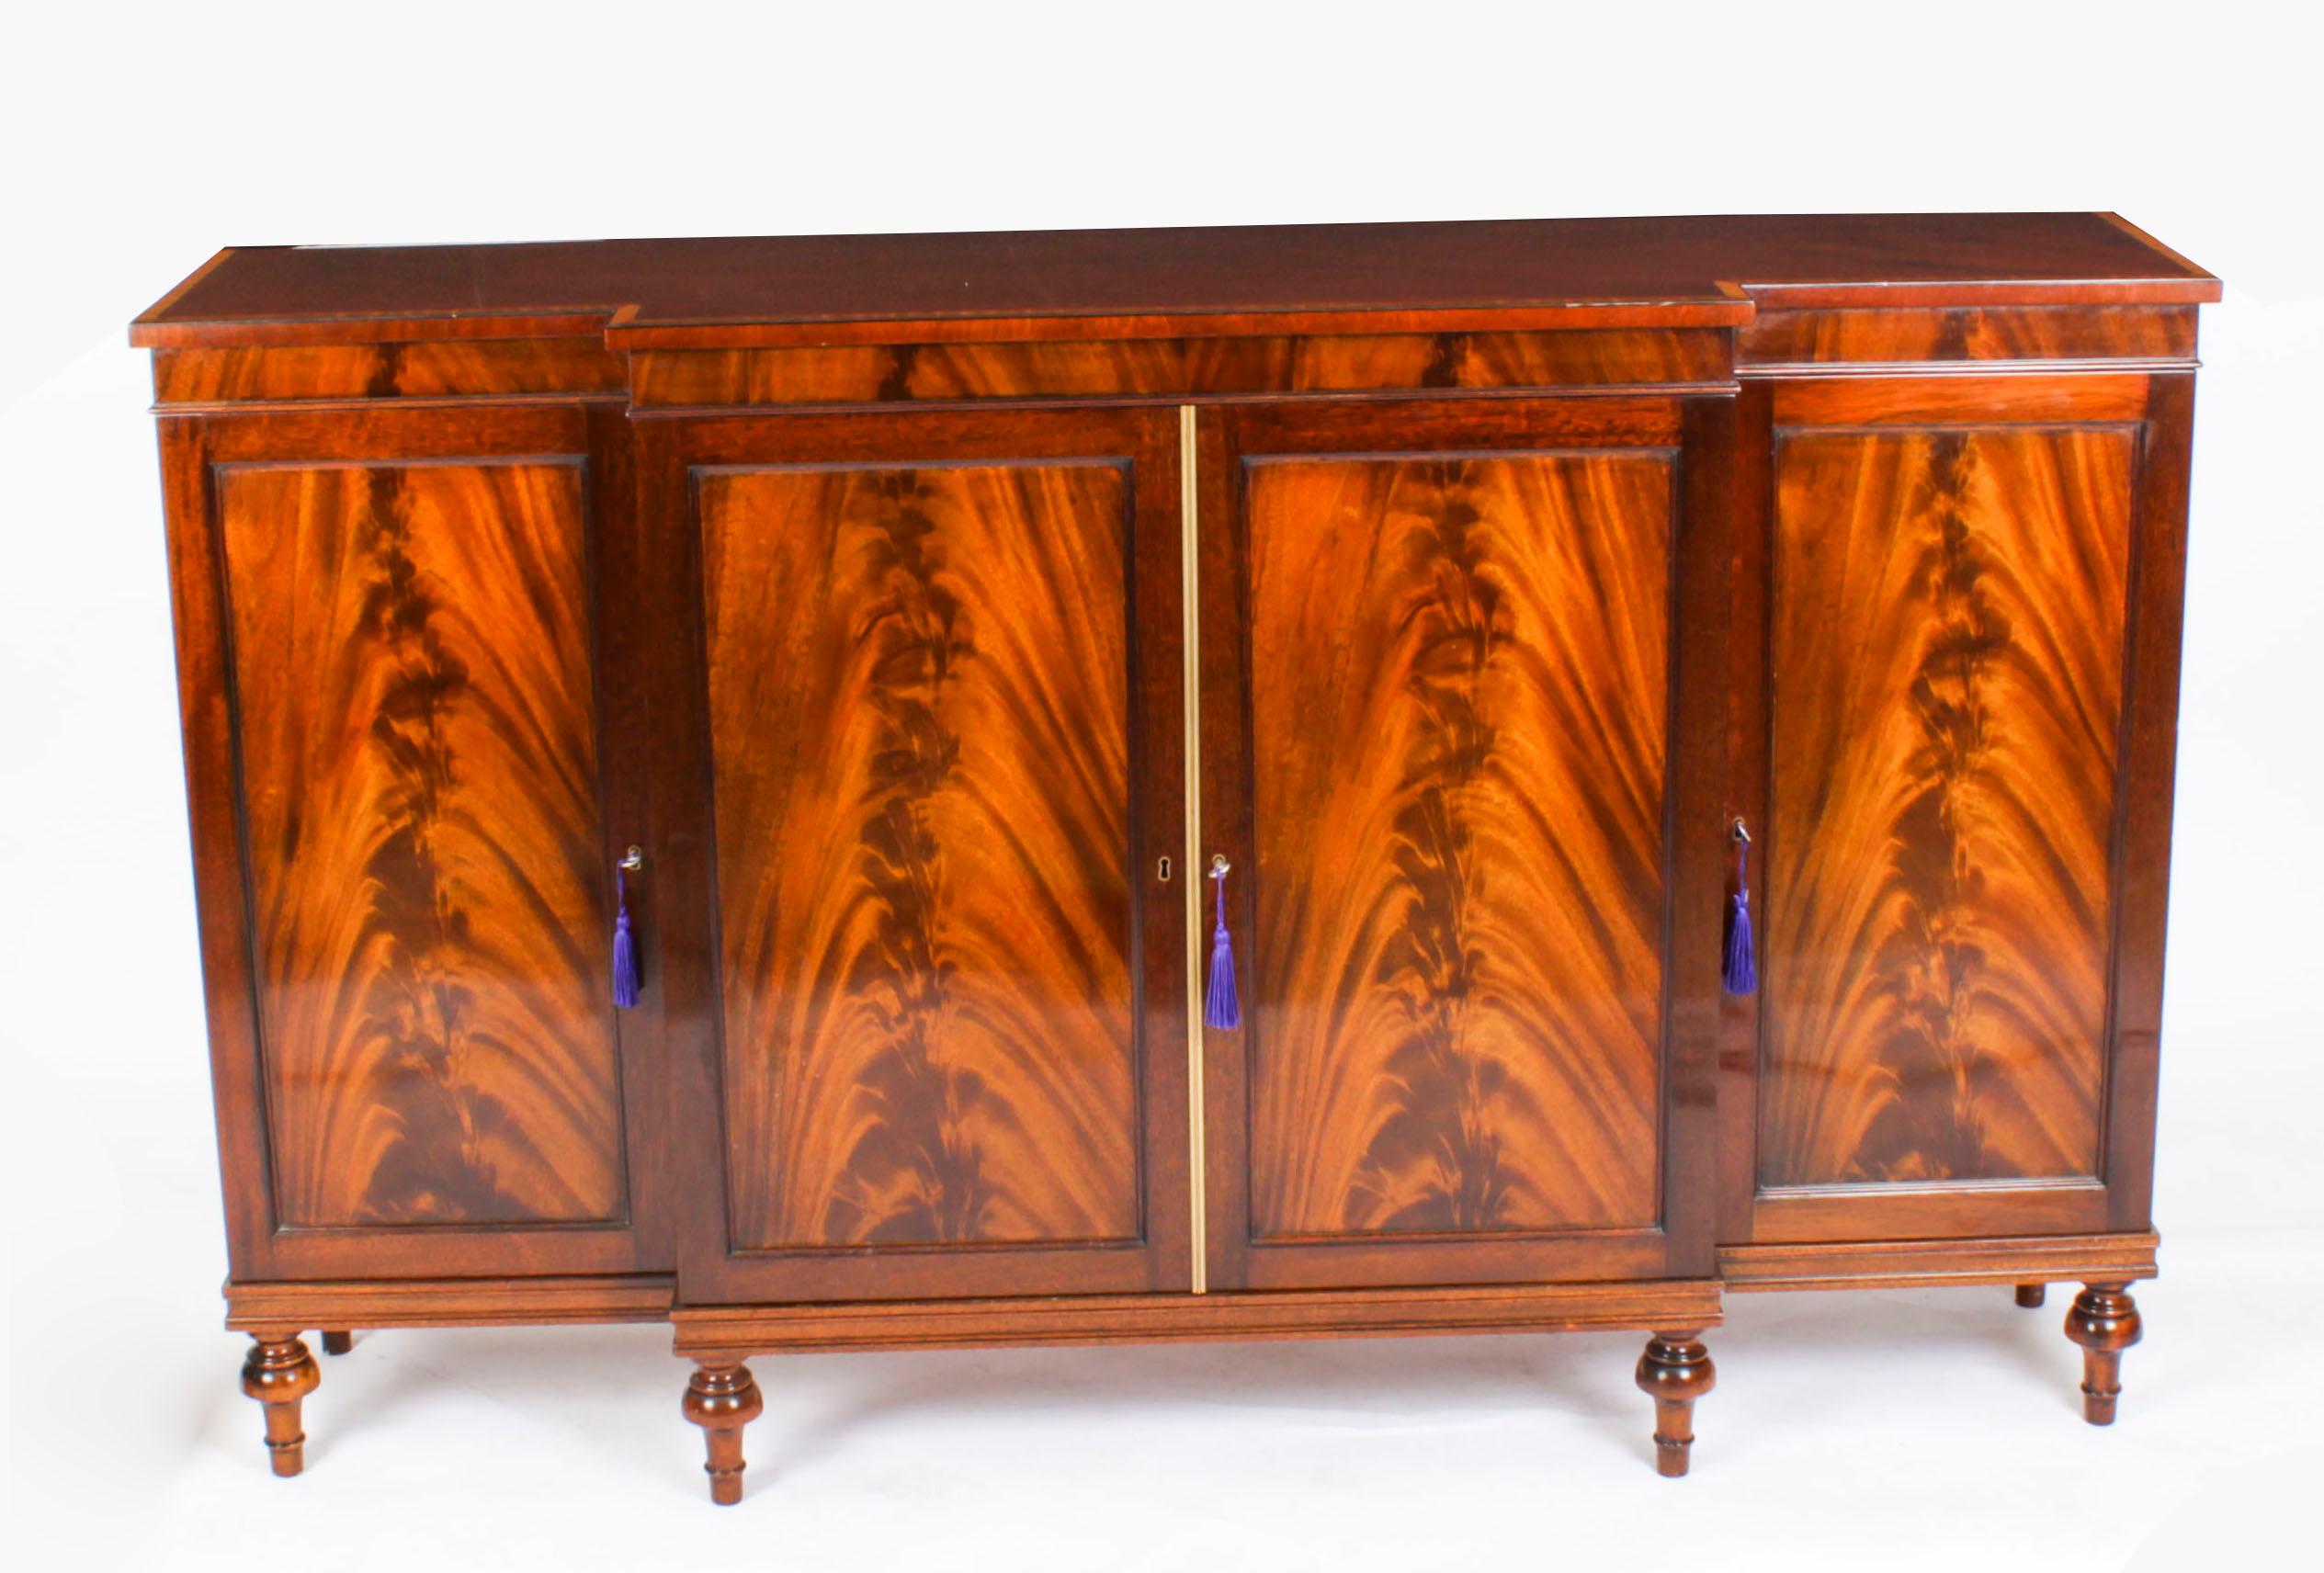 This is a fabulous Vintage Regency Revival breakfront sideboard by the master cabinet maker William Tillman, Circa 1980 in date.

It is made of stunning flame mahogany crossbanded in satinwood, fitted with four panelled doors and raised on turned